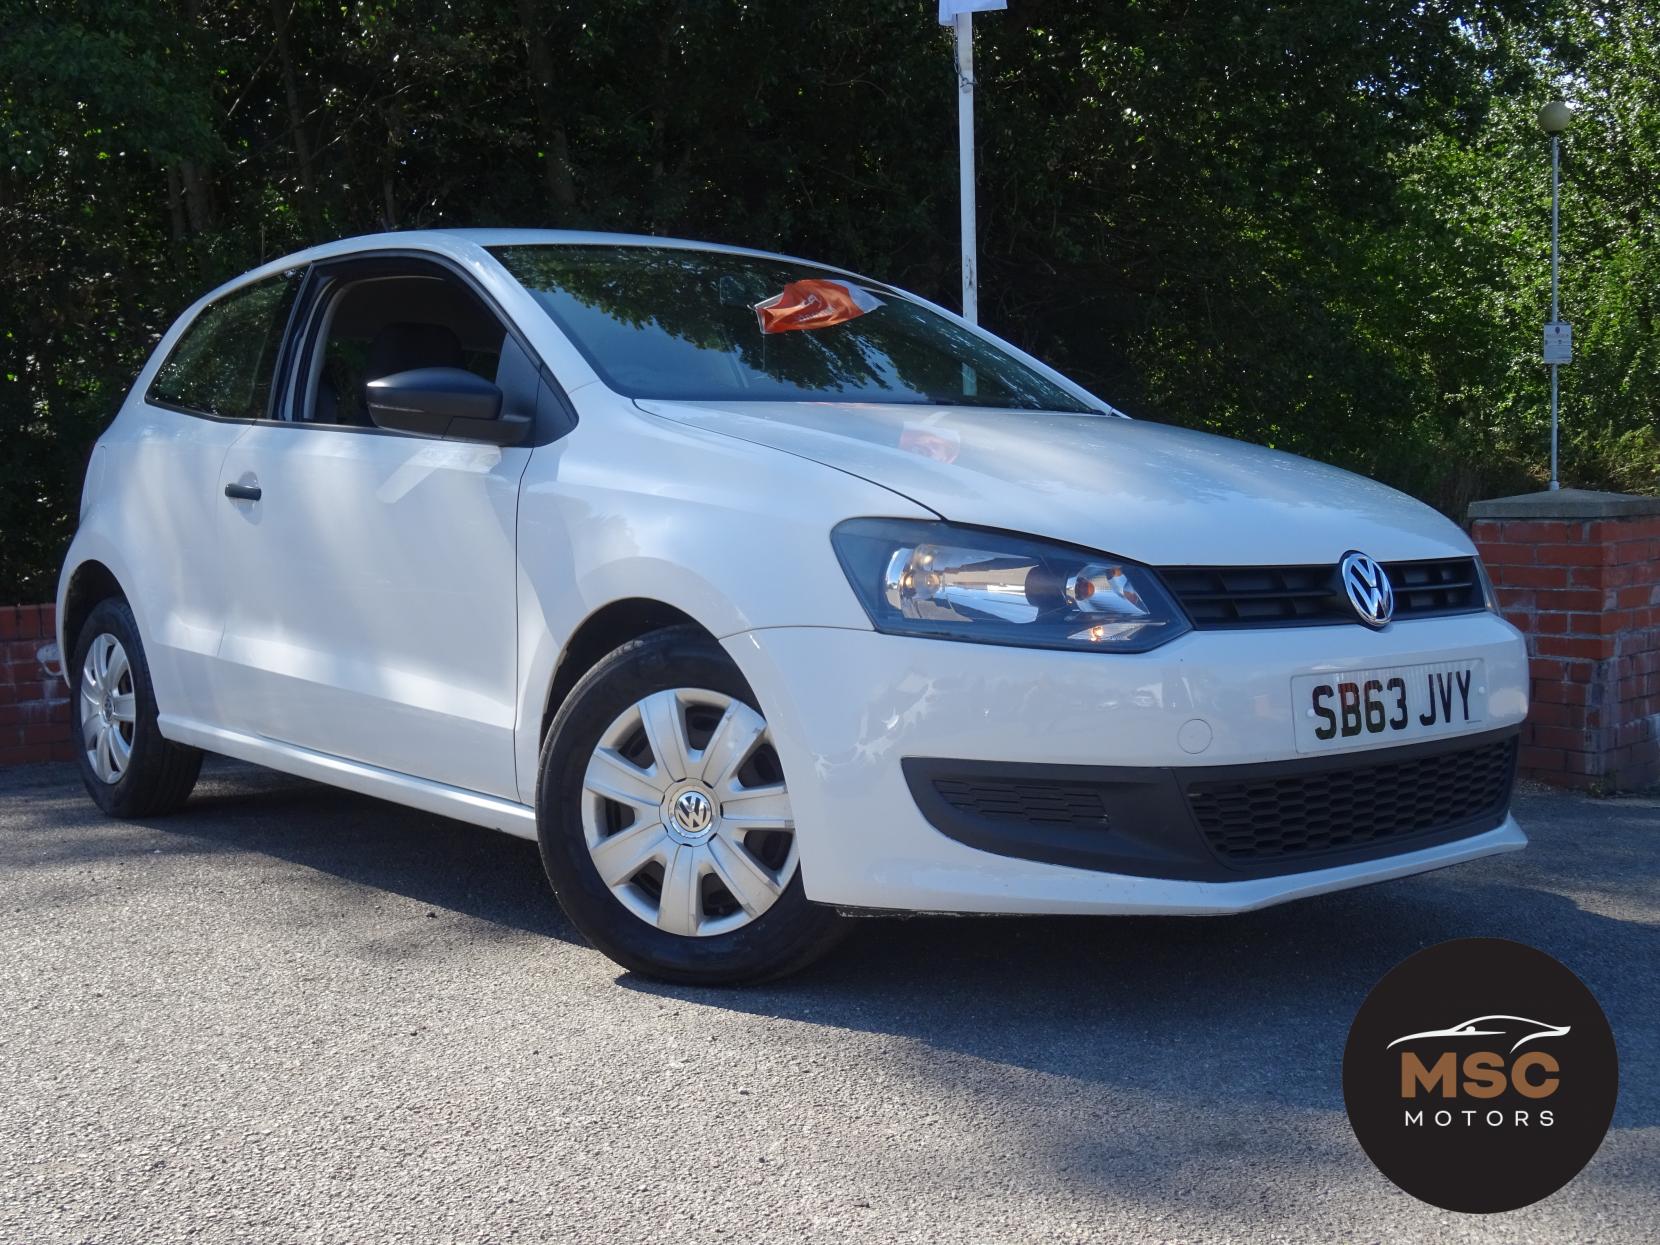 Volkswagen Polo 1.2 S Hatchback 3dr Petrol Manual Euro 5 (60 ps)